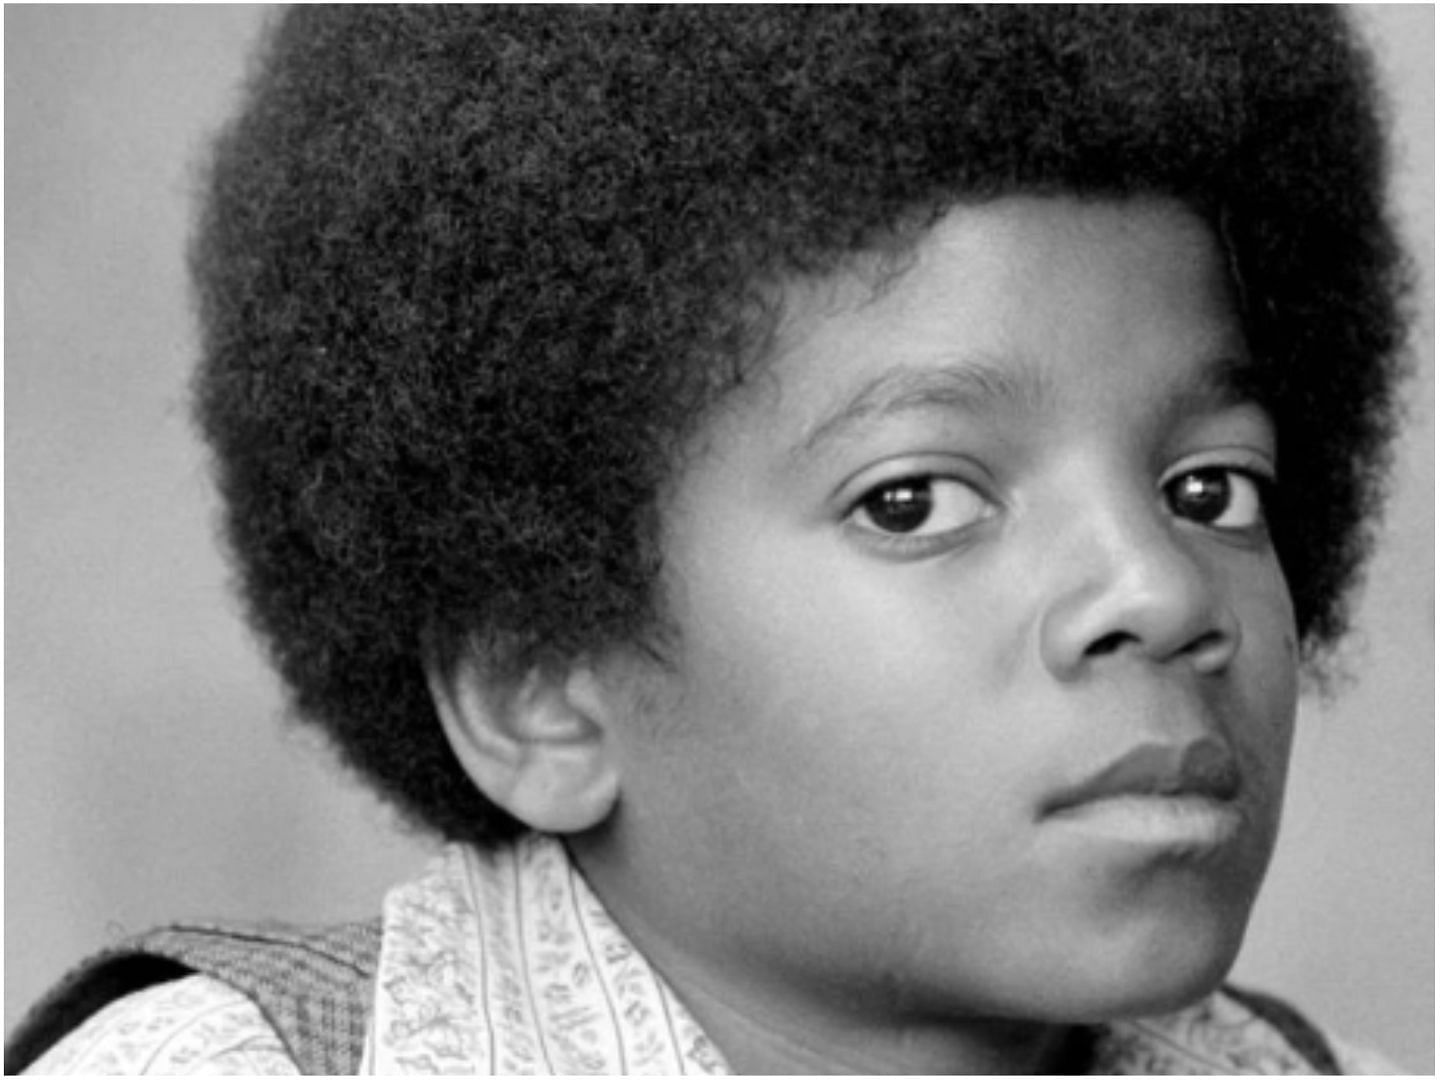 Michael was the eighth of nine children in a family of 12. (Image via Instagram @michaeljackson100photo)